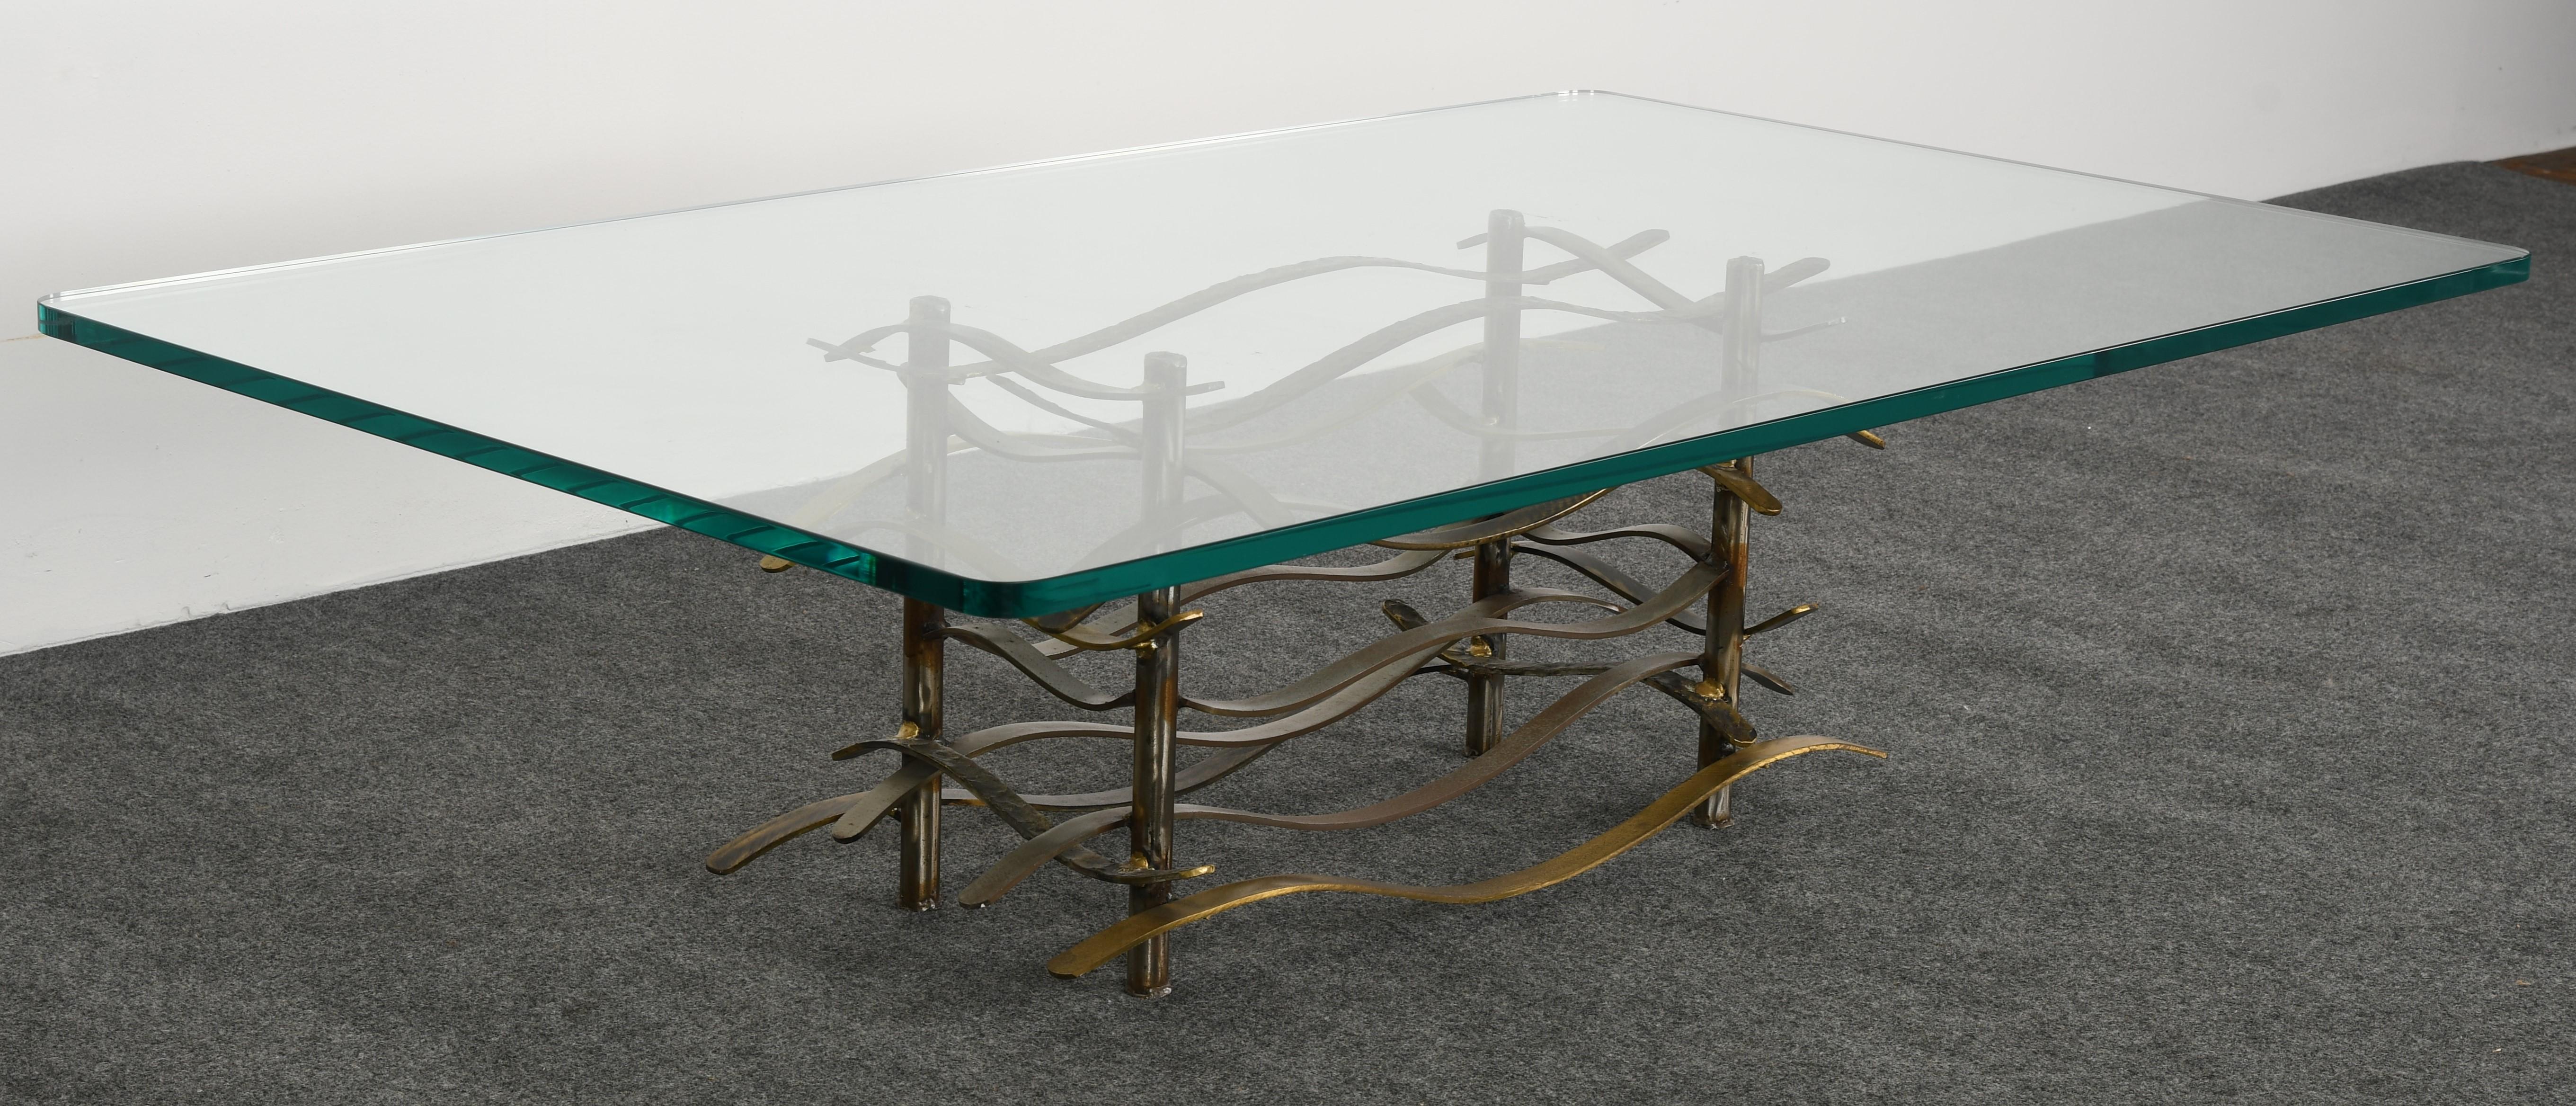 Silas Seandel Ribbon Coffee Table, 1977 In Good Condition For Sale In Hamburg, PA